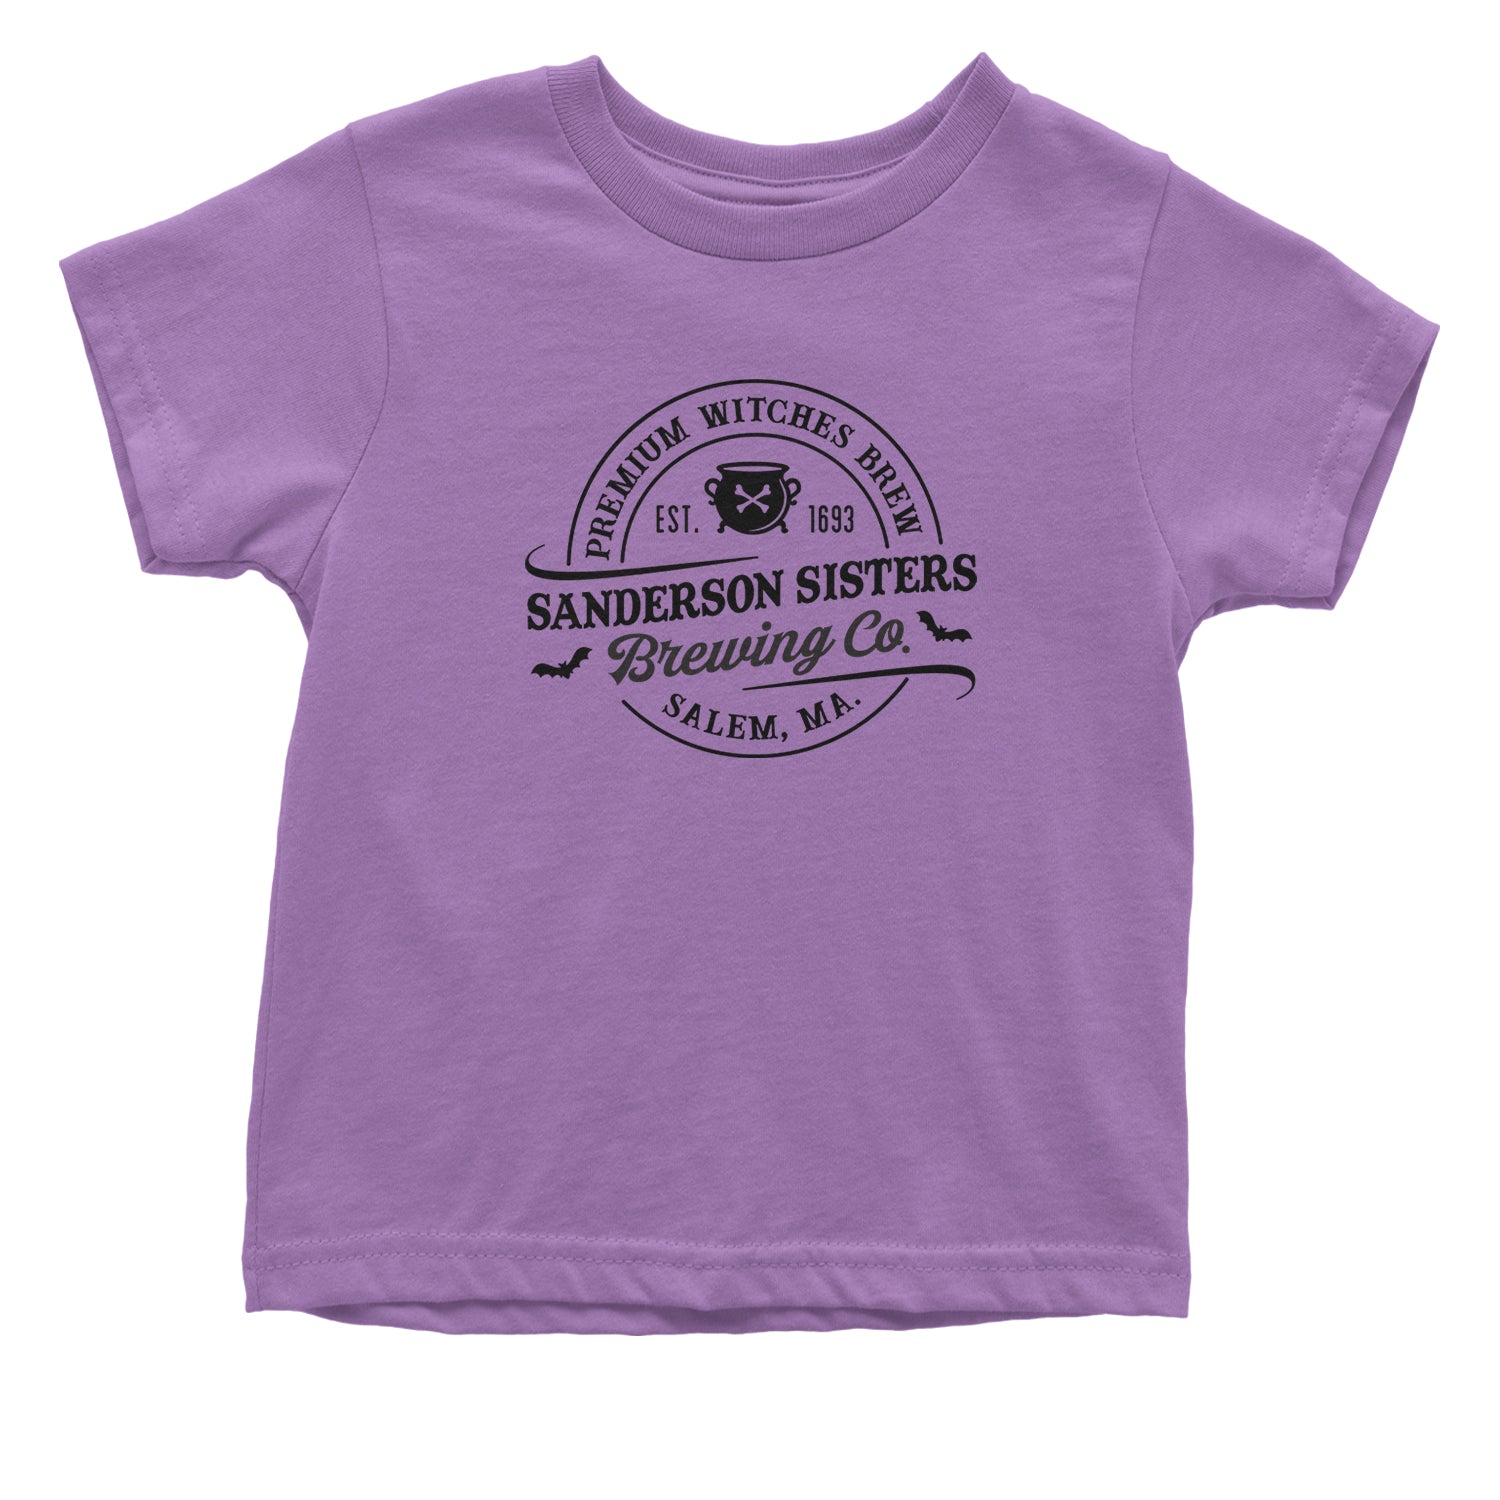 Sanderson Sisters Brewing Company Witches Brew Infant One-Piece Romper Bodysuit and Toddler T-shirt descendants, enchanted, eve, hallows, hocus, or, pocus, sanderson, sisters, treat, trick, witches by Expression Tees